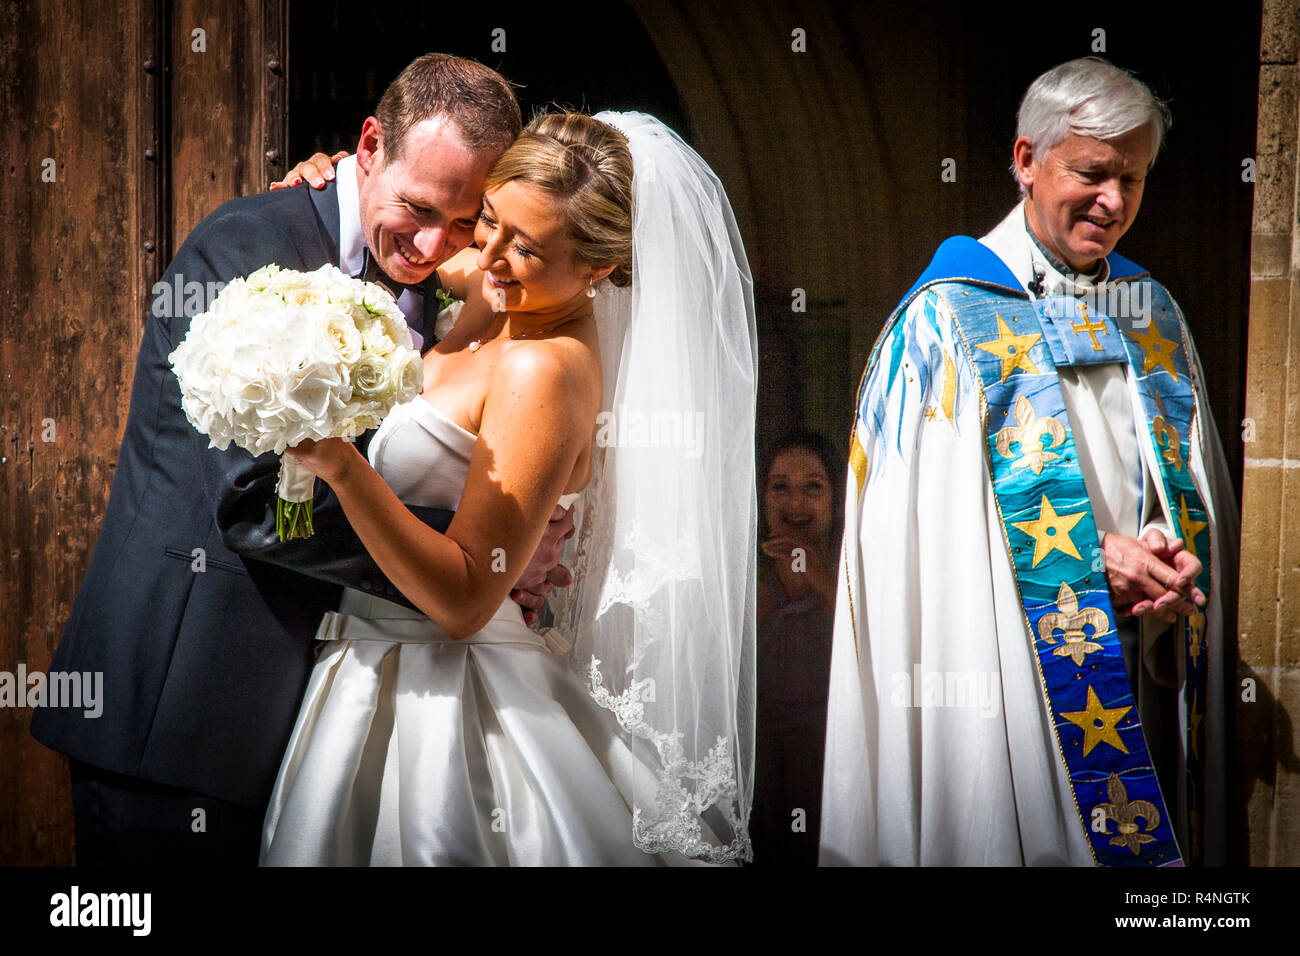 Happiness and satisfaction. After the Wedding the couple and the vicar are smiling Stock Photo